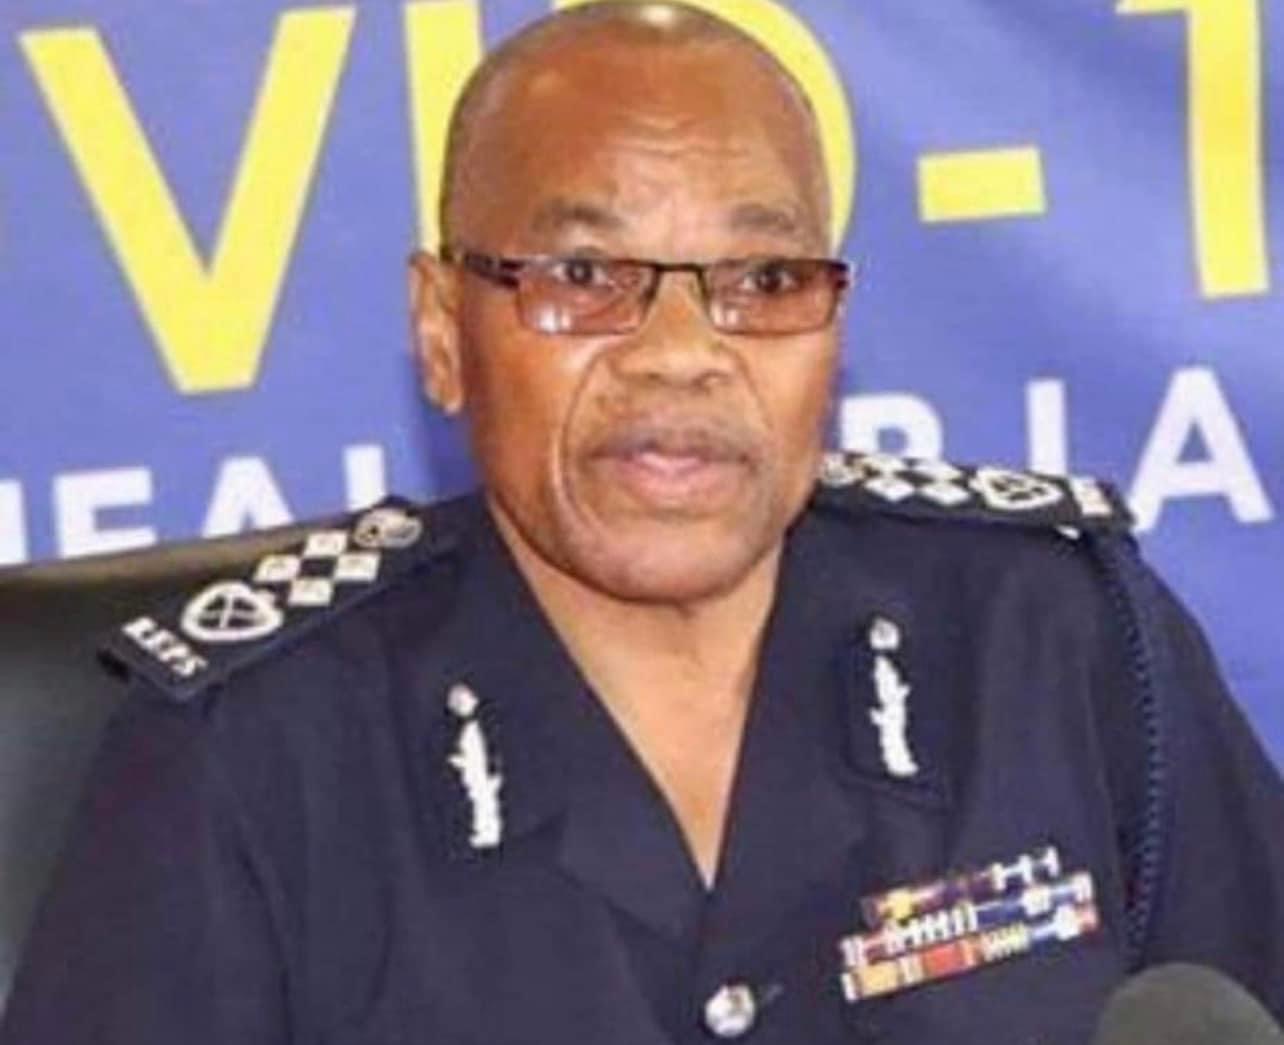 Police Executive Command halts training after identification of political activists, recruits to be vetted again.